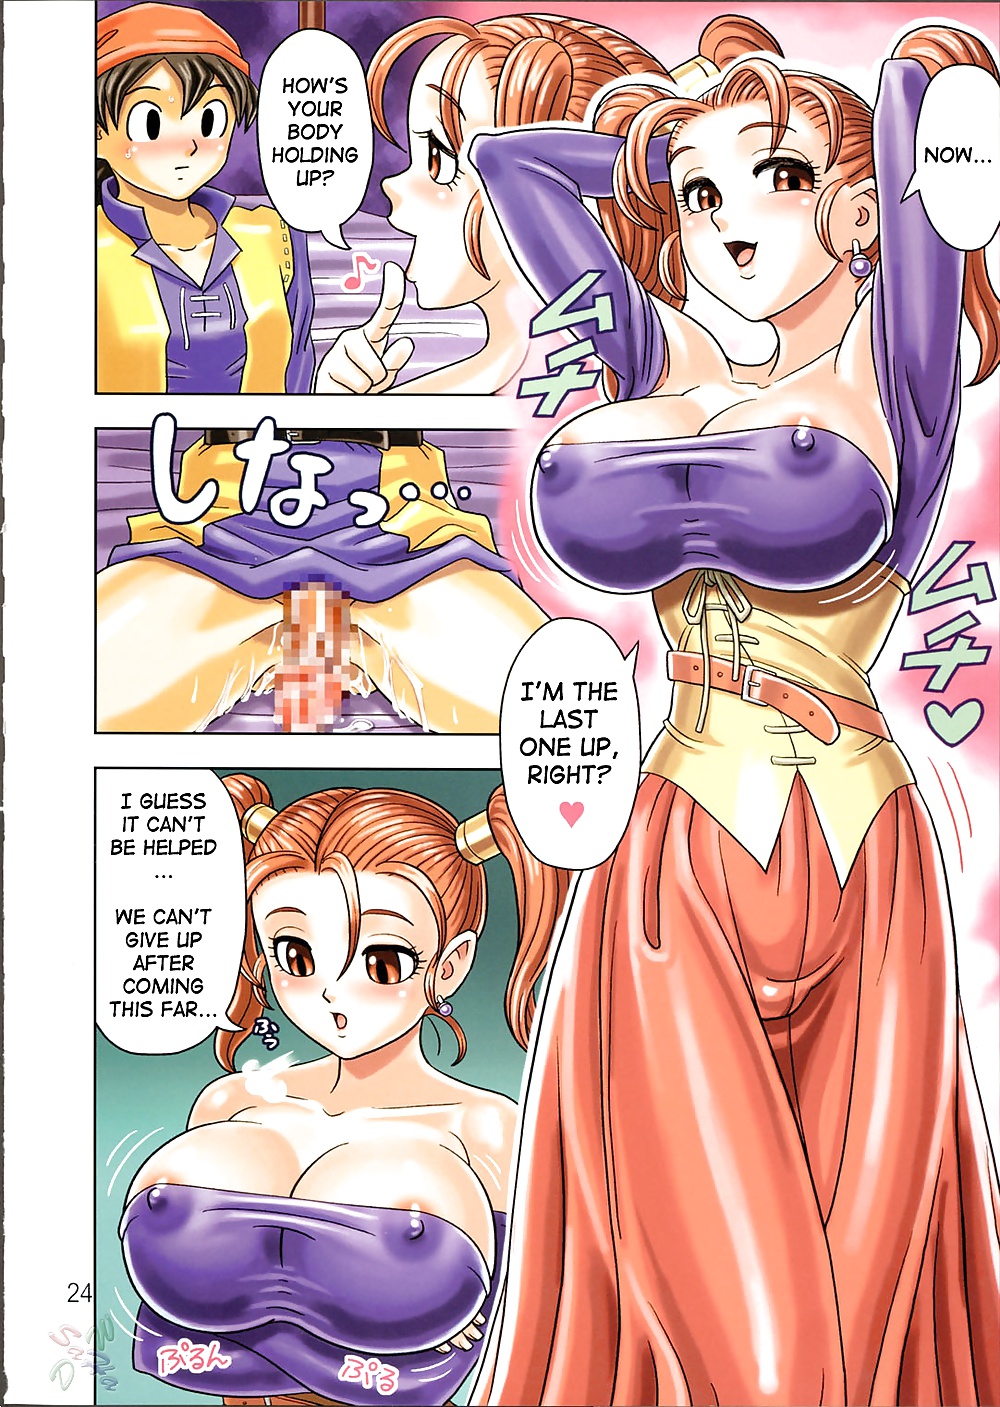 Perverted Hentai comic of Girls in Hot Skimpy outfits! #9350342